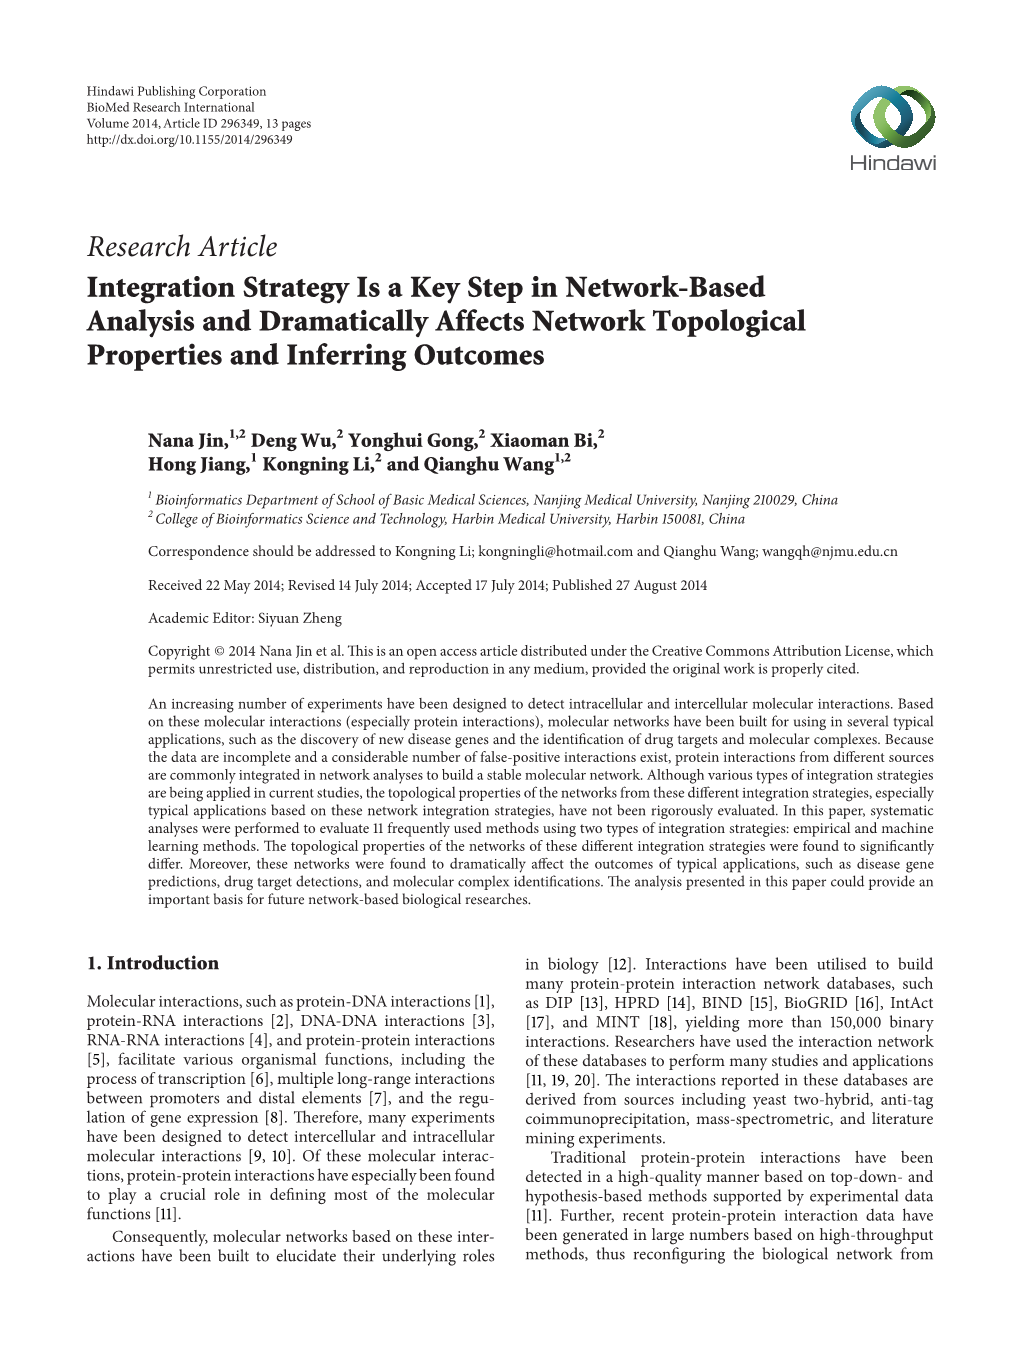 Integration Strategy Is a Key Step in Network-Based Analysis and Dramatically Affects Network Topological Properties and Inferring Outcomes